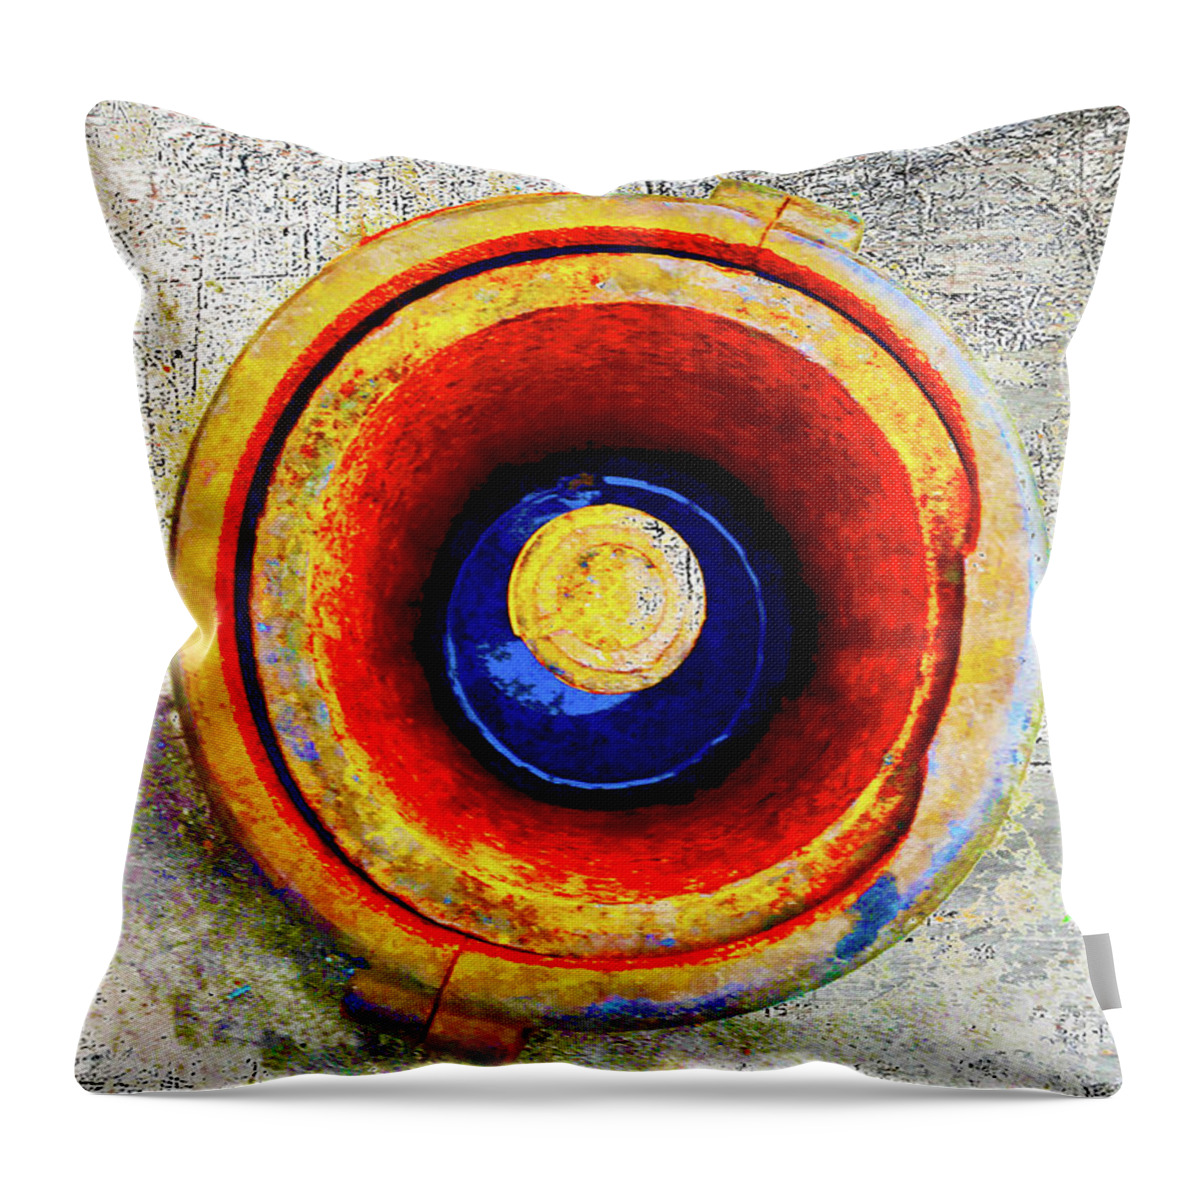 Rusty Hole Throw Pillow featuring the mixed media Royal Air Force by Tony Rubino